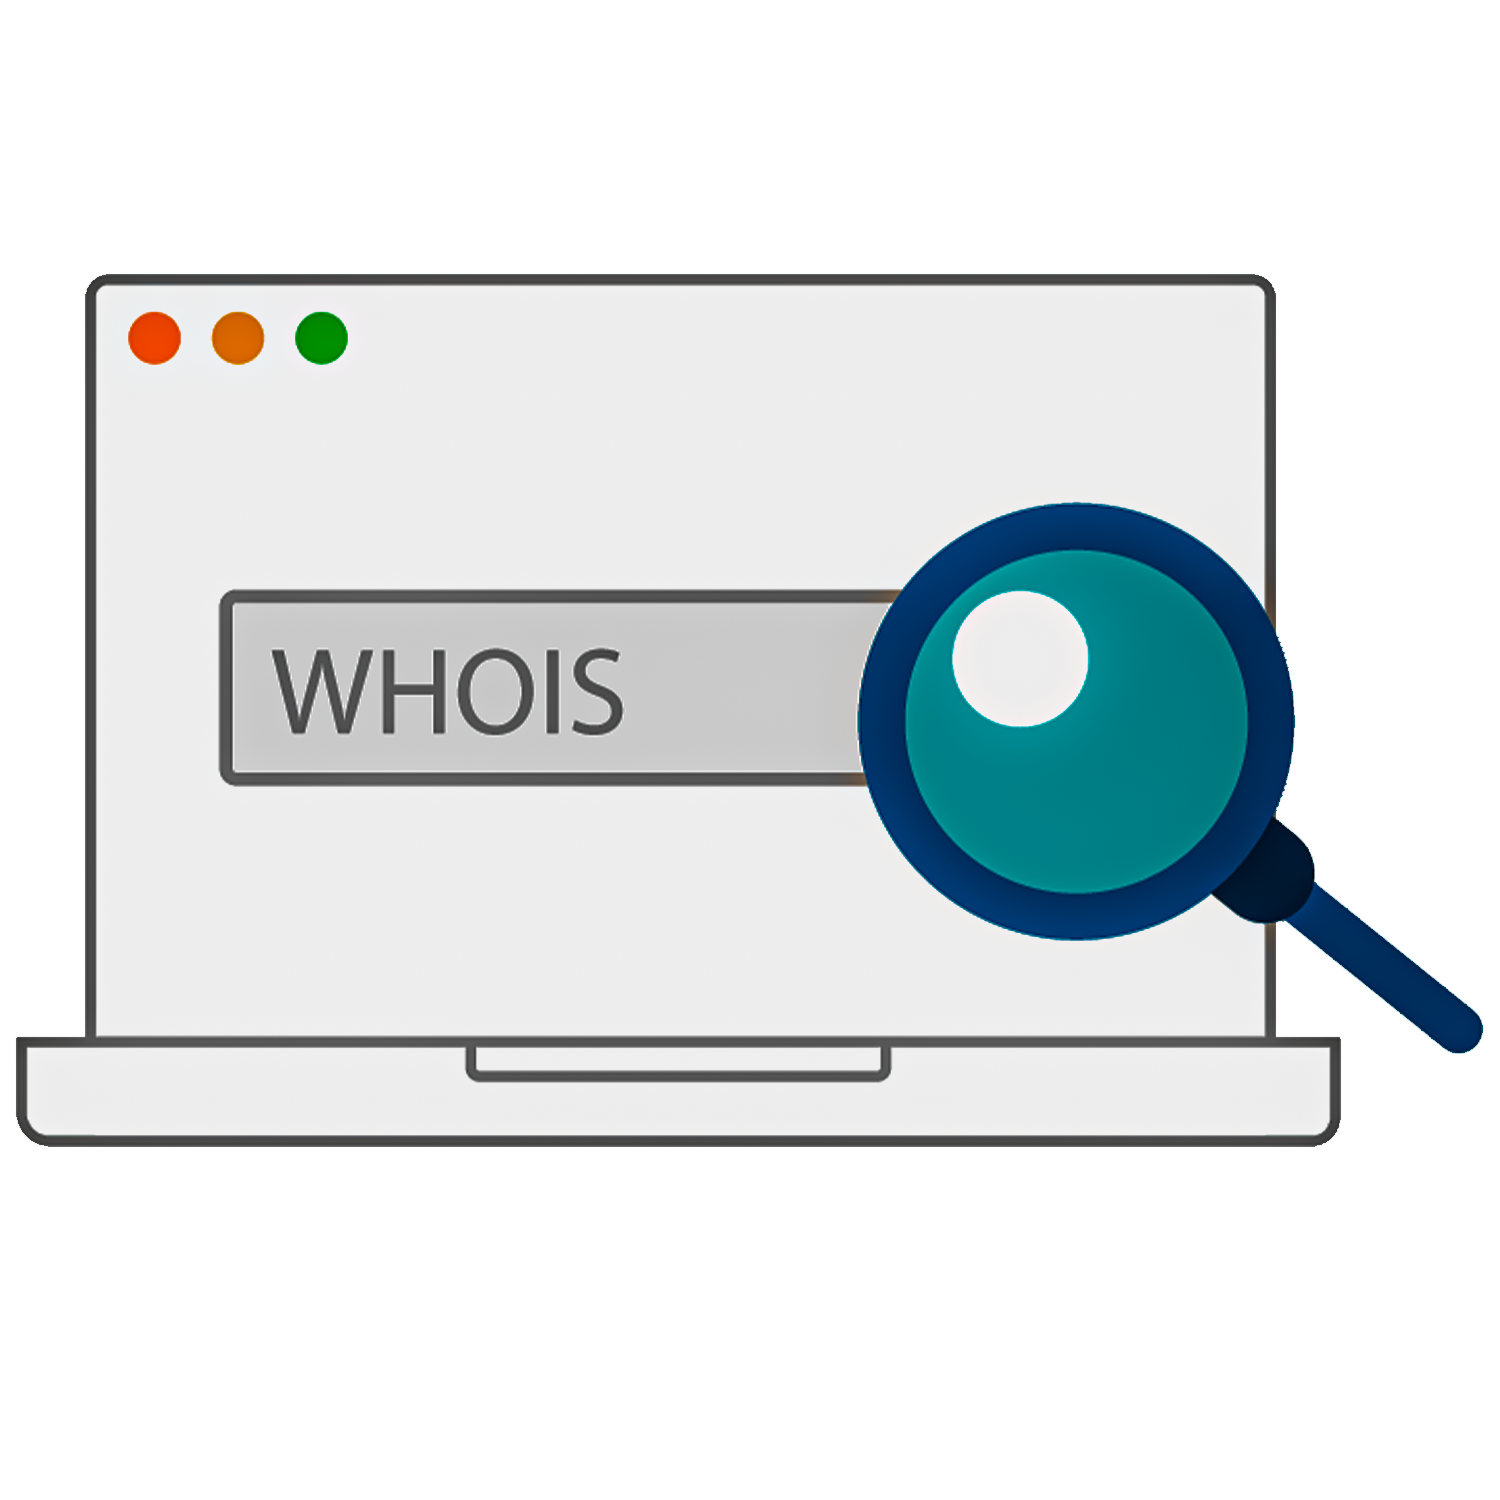 Whois Domain Lookup